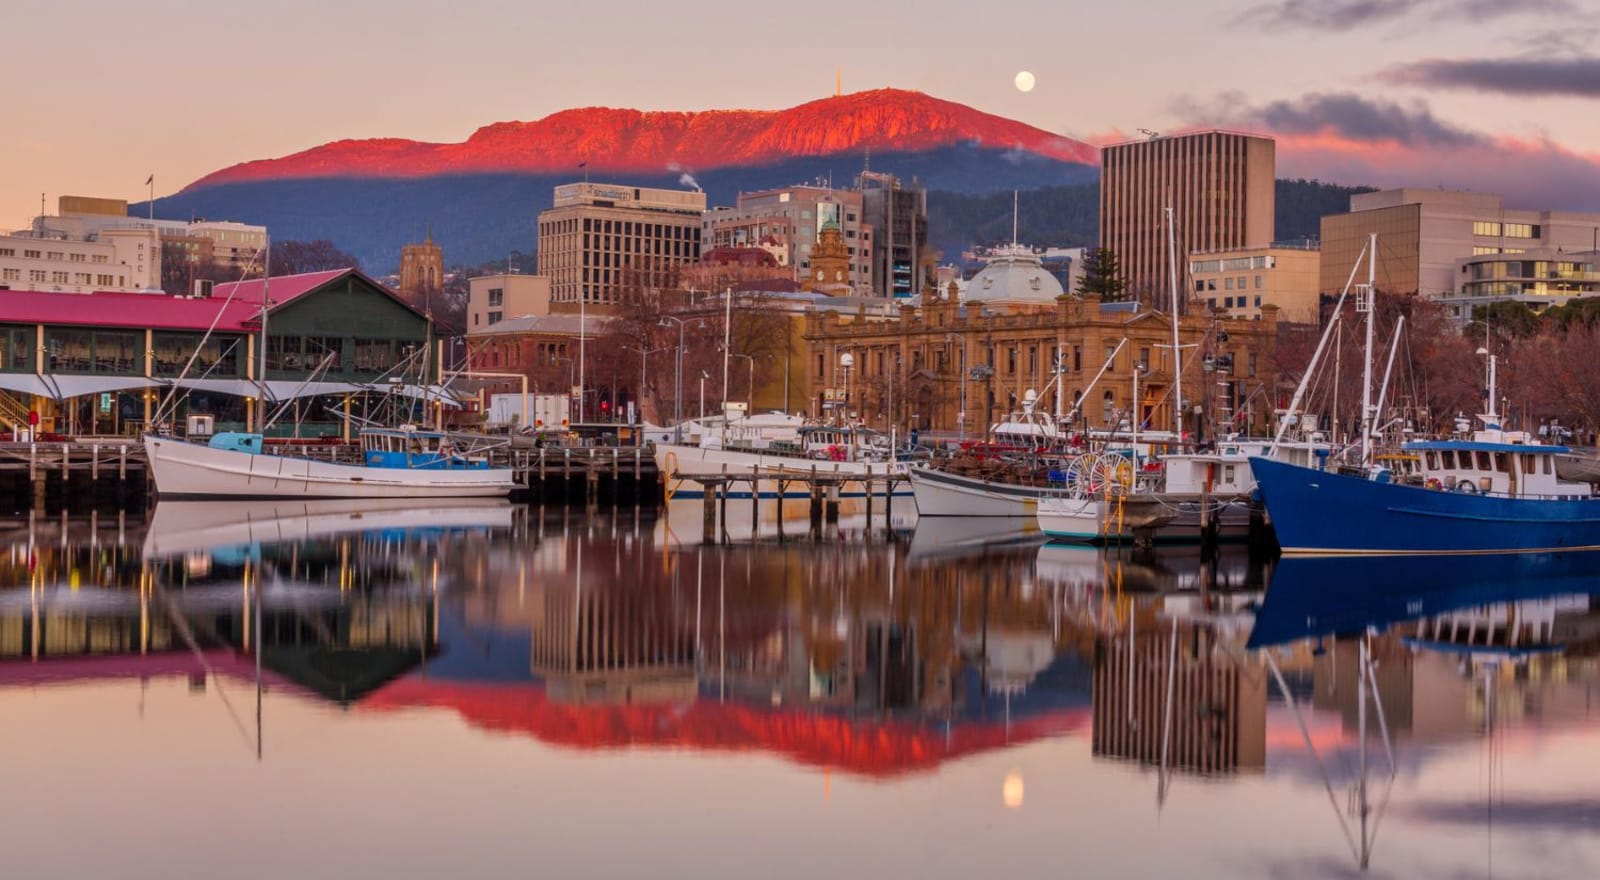 sunset at bay in hobart with boats in water